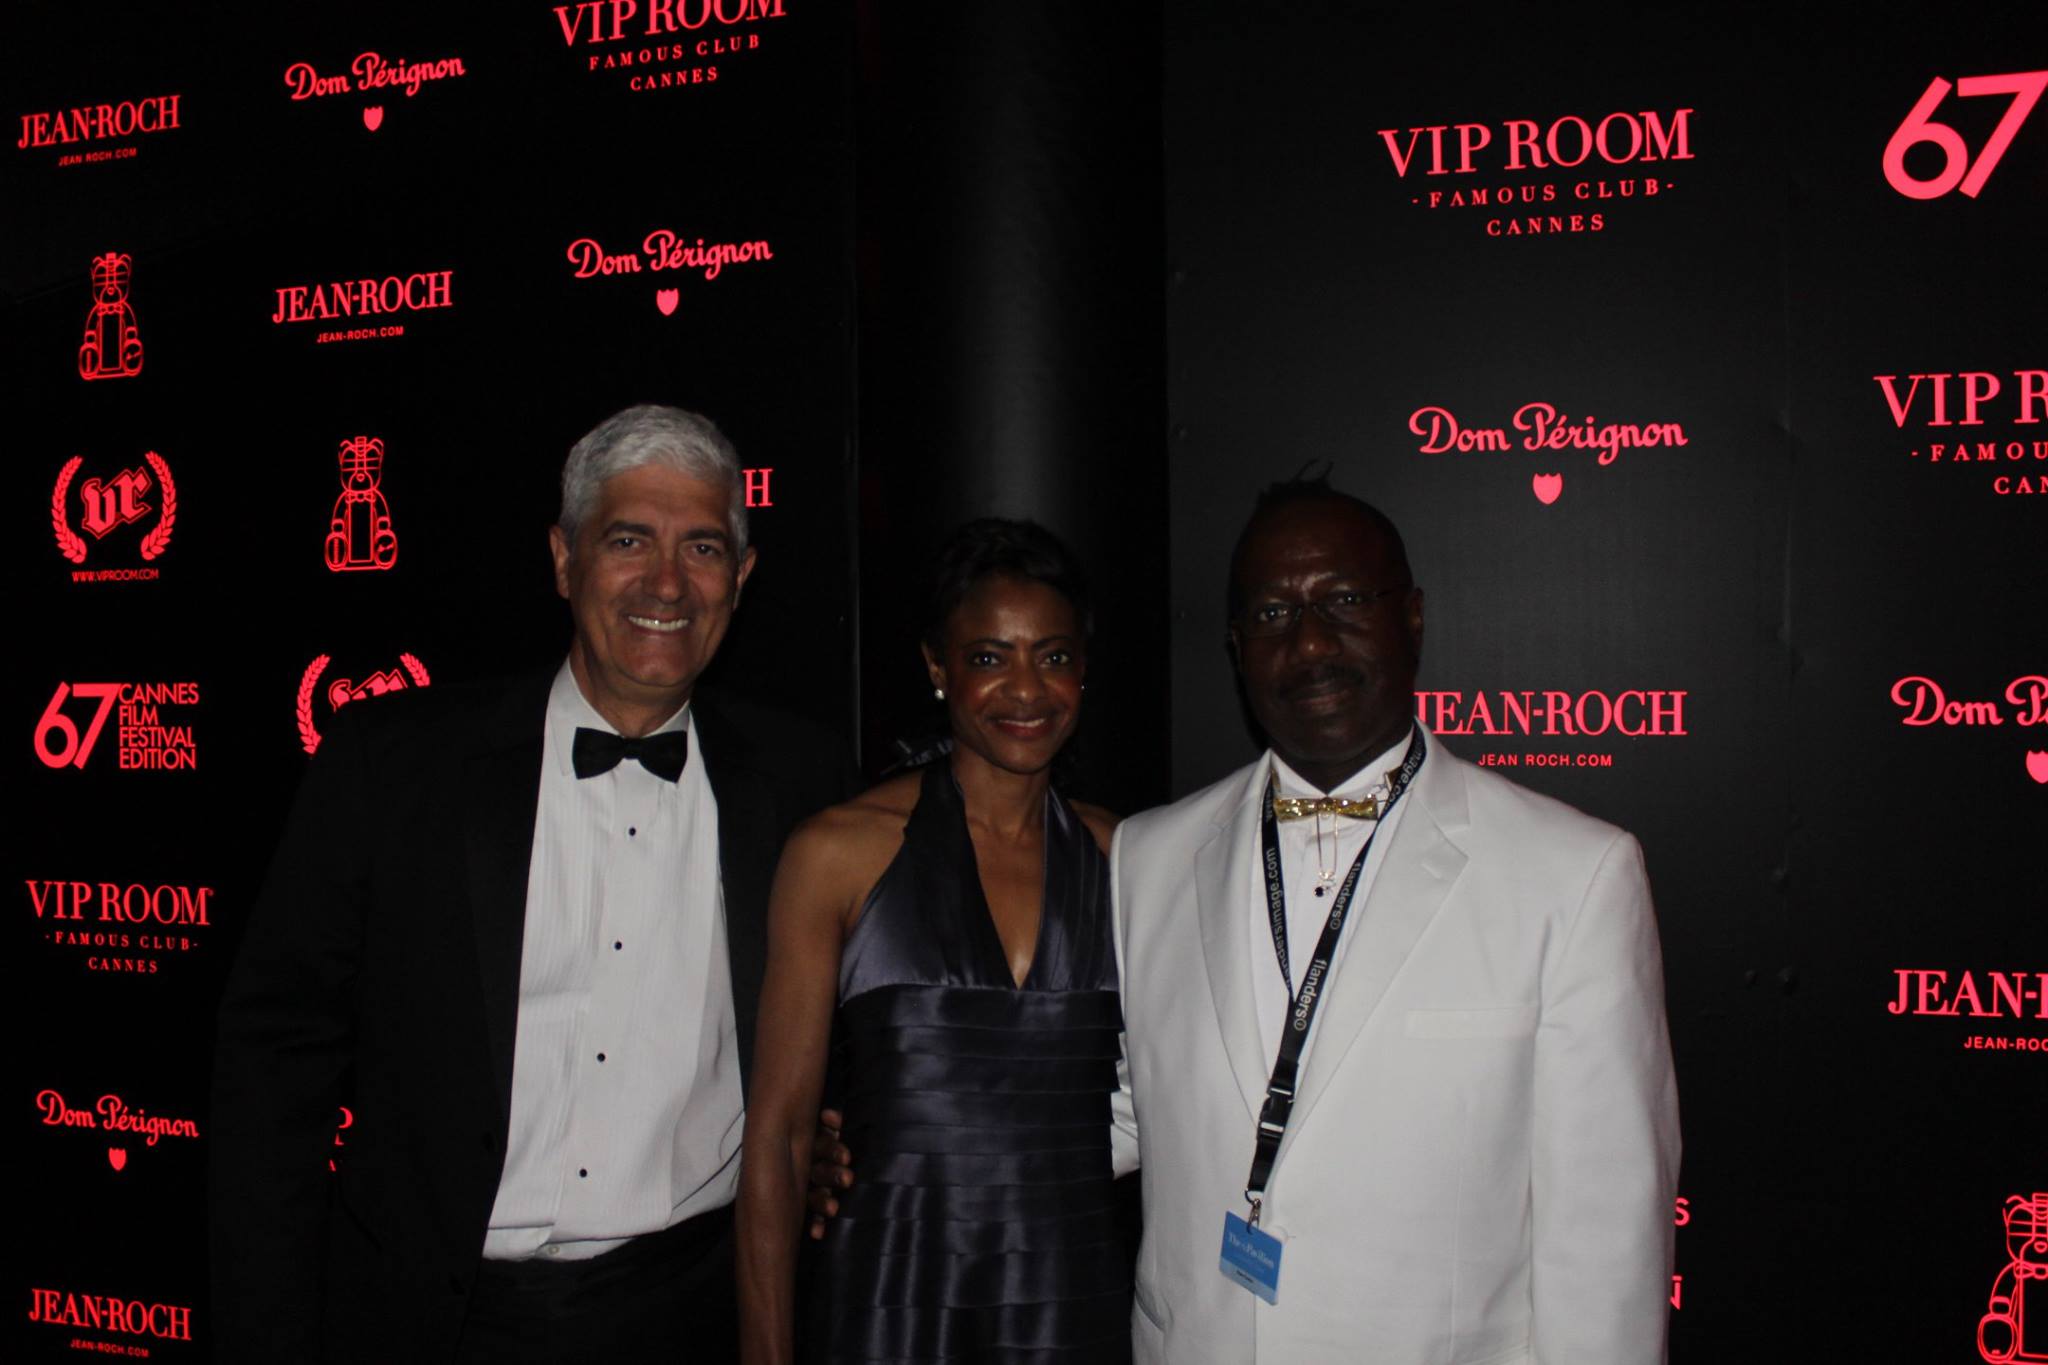 Swimming Wings & Cinerockom Welcome Party/Festival de Cannes 2014  with Alain Azoulay, Dr. Gail Gordon & Director Bruce B. Gordon (in Cannes, France).